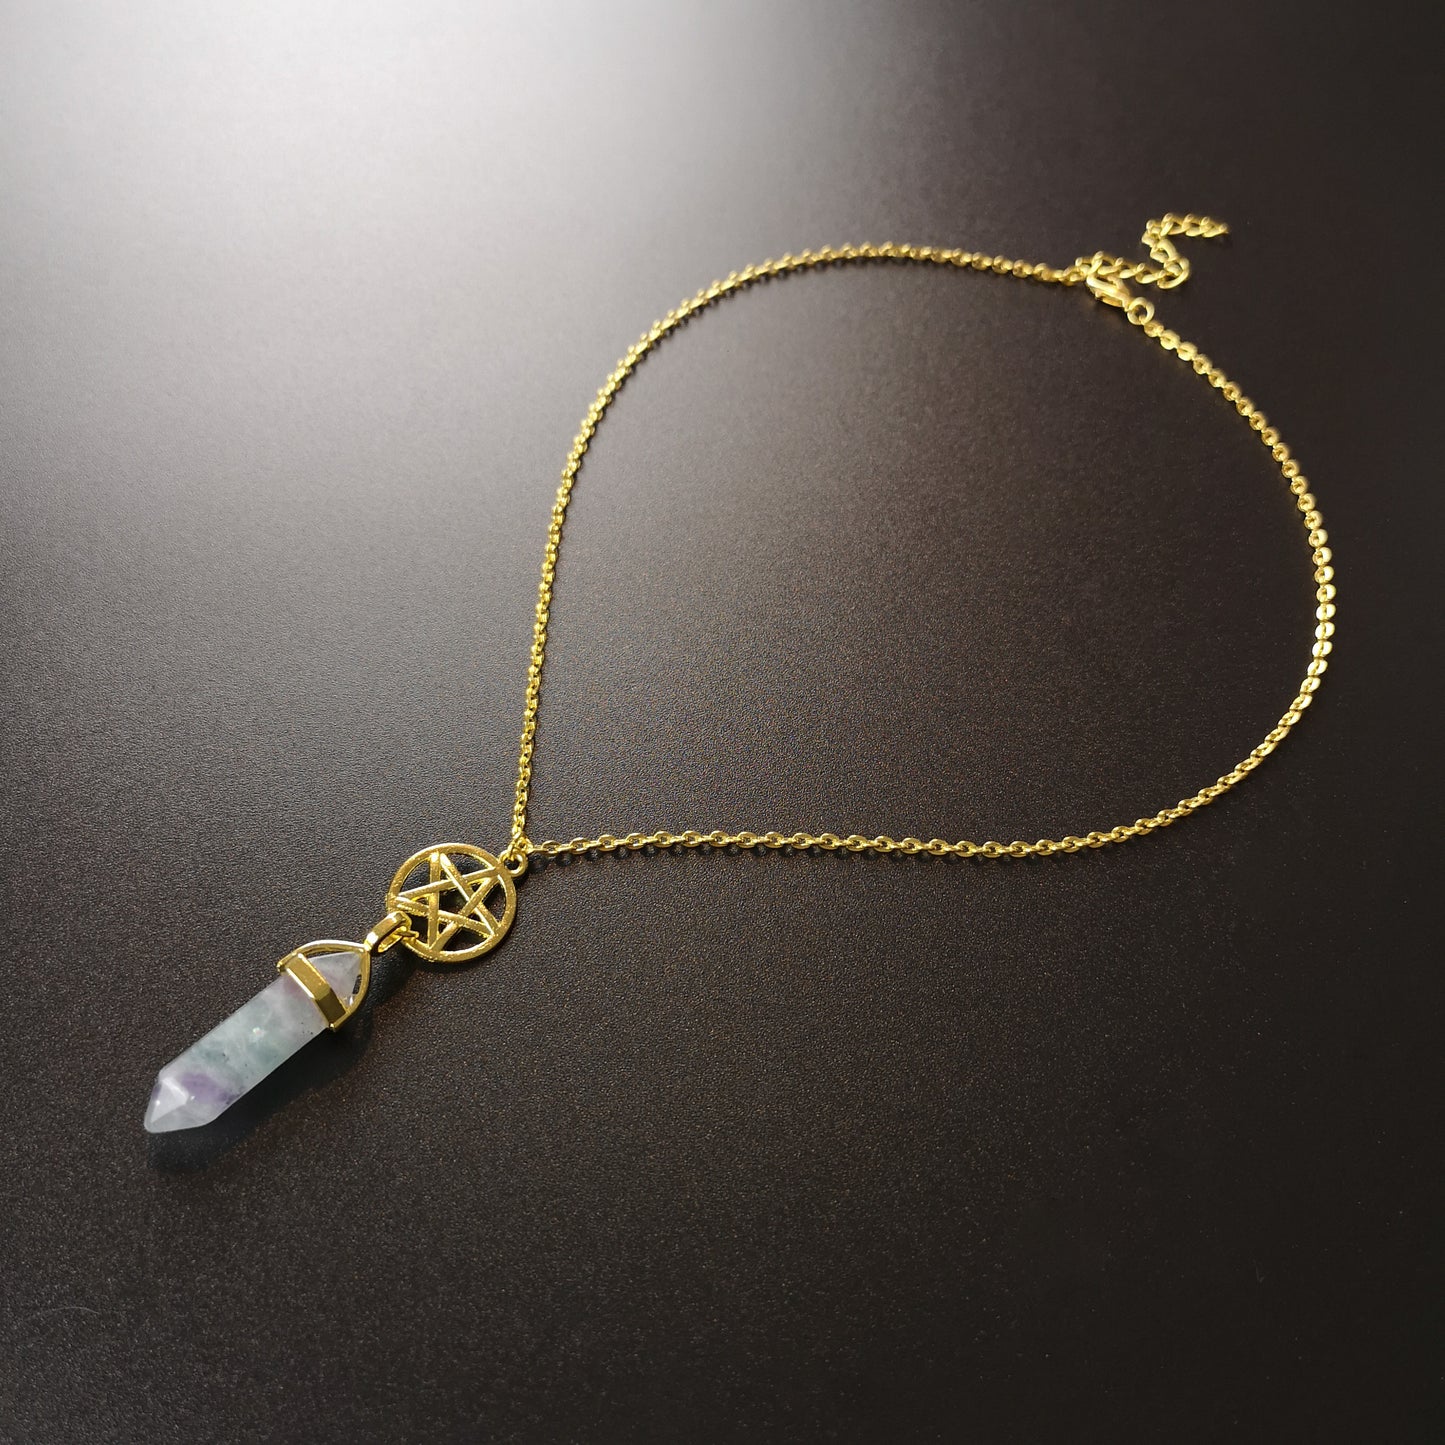 Golden fluorite and pentacle divination pendulum necklace - The French Witch shop